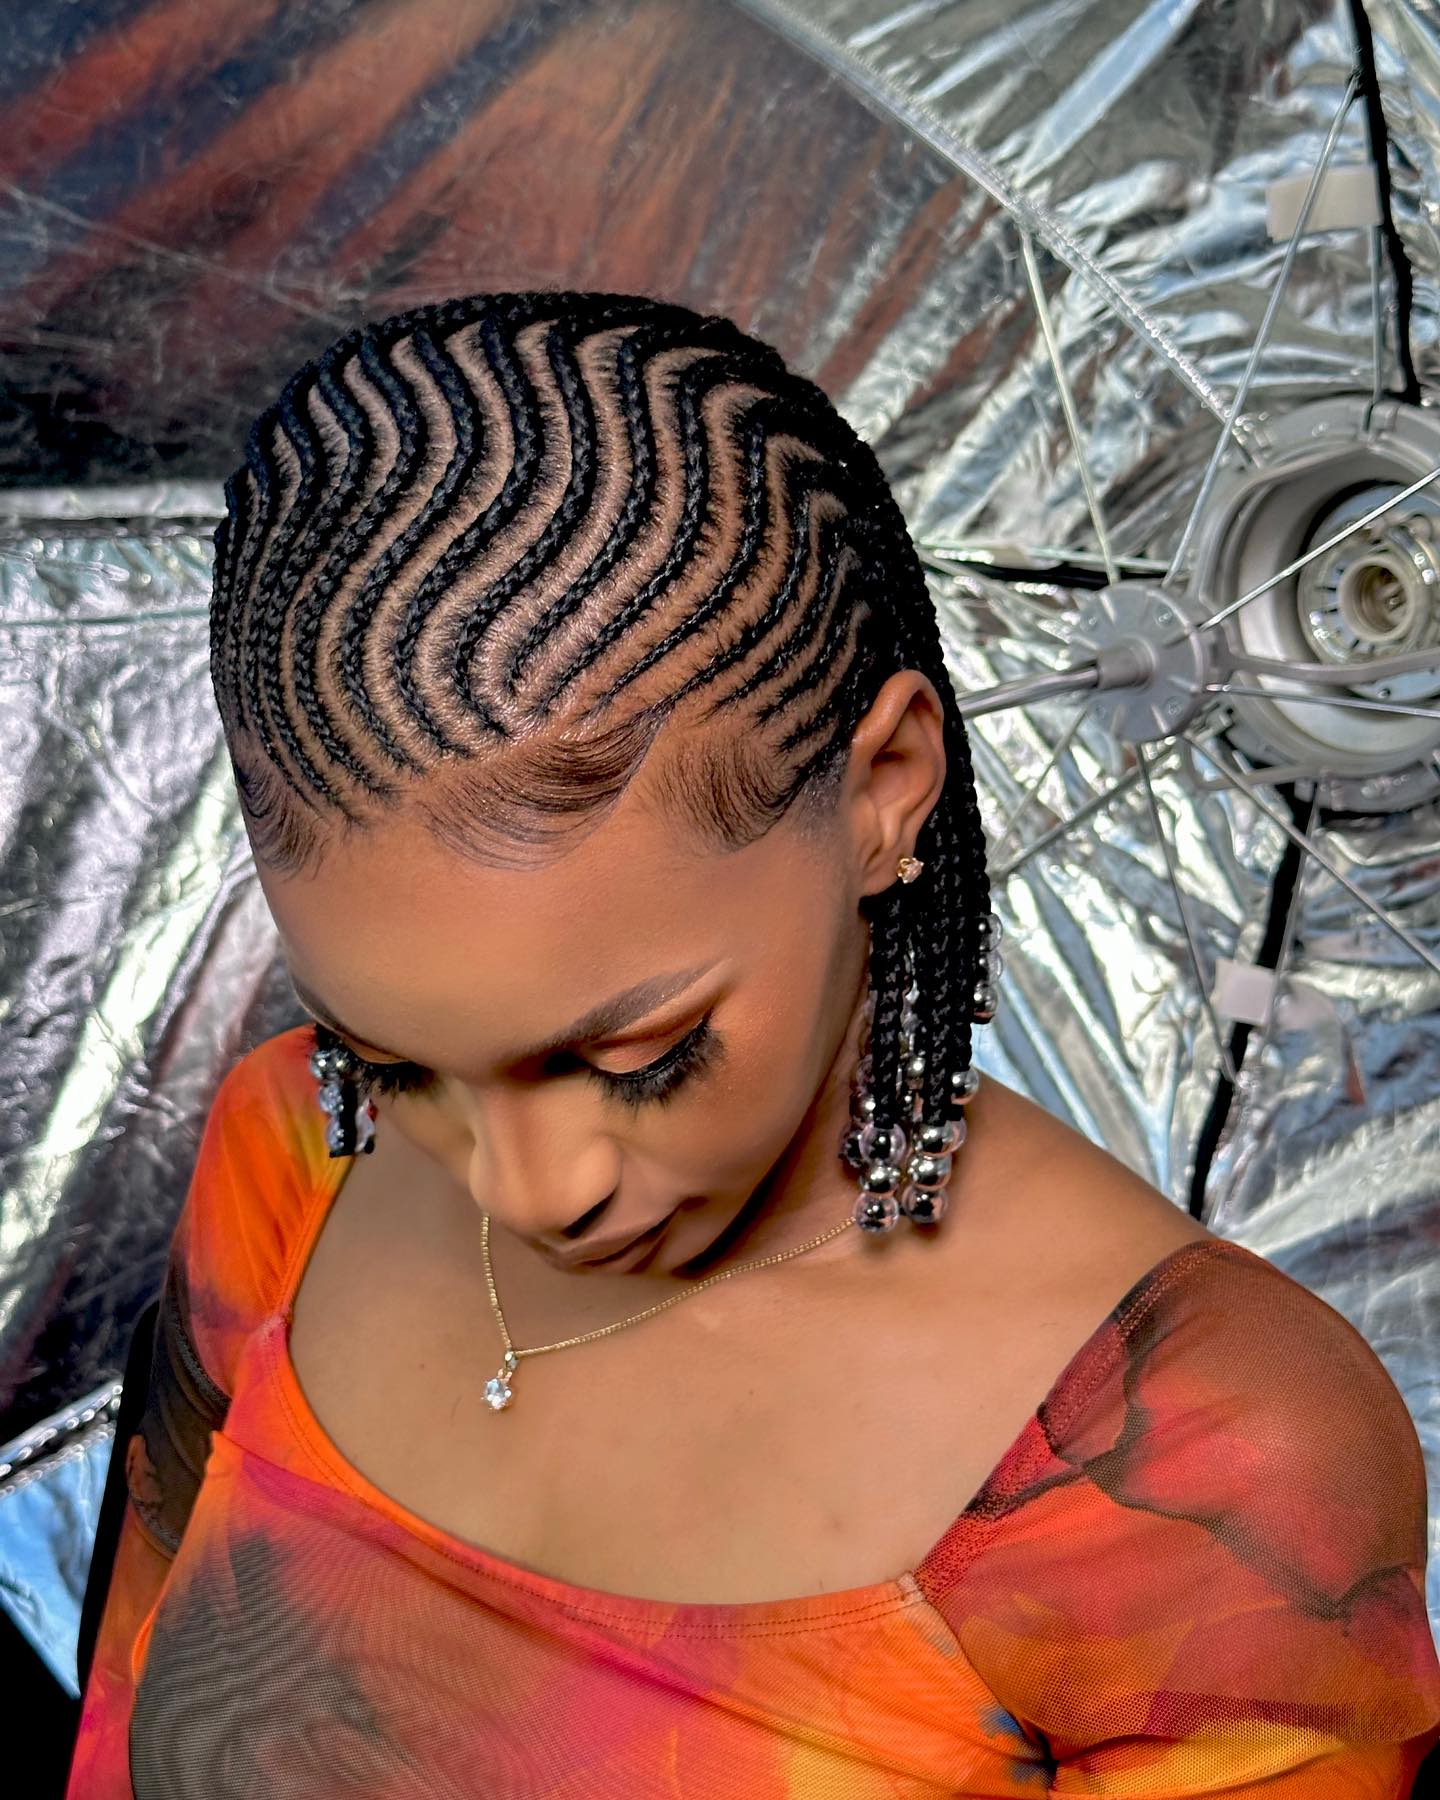 40 Captivating Black Braided Hairstyles for a Stylish Look